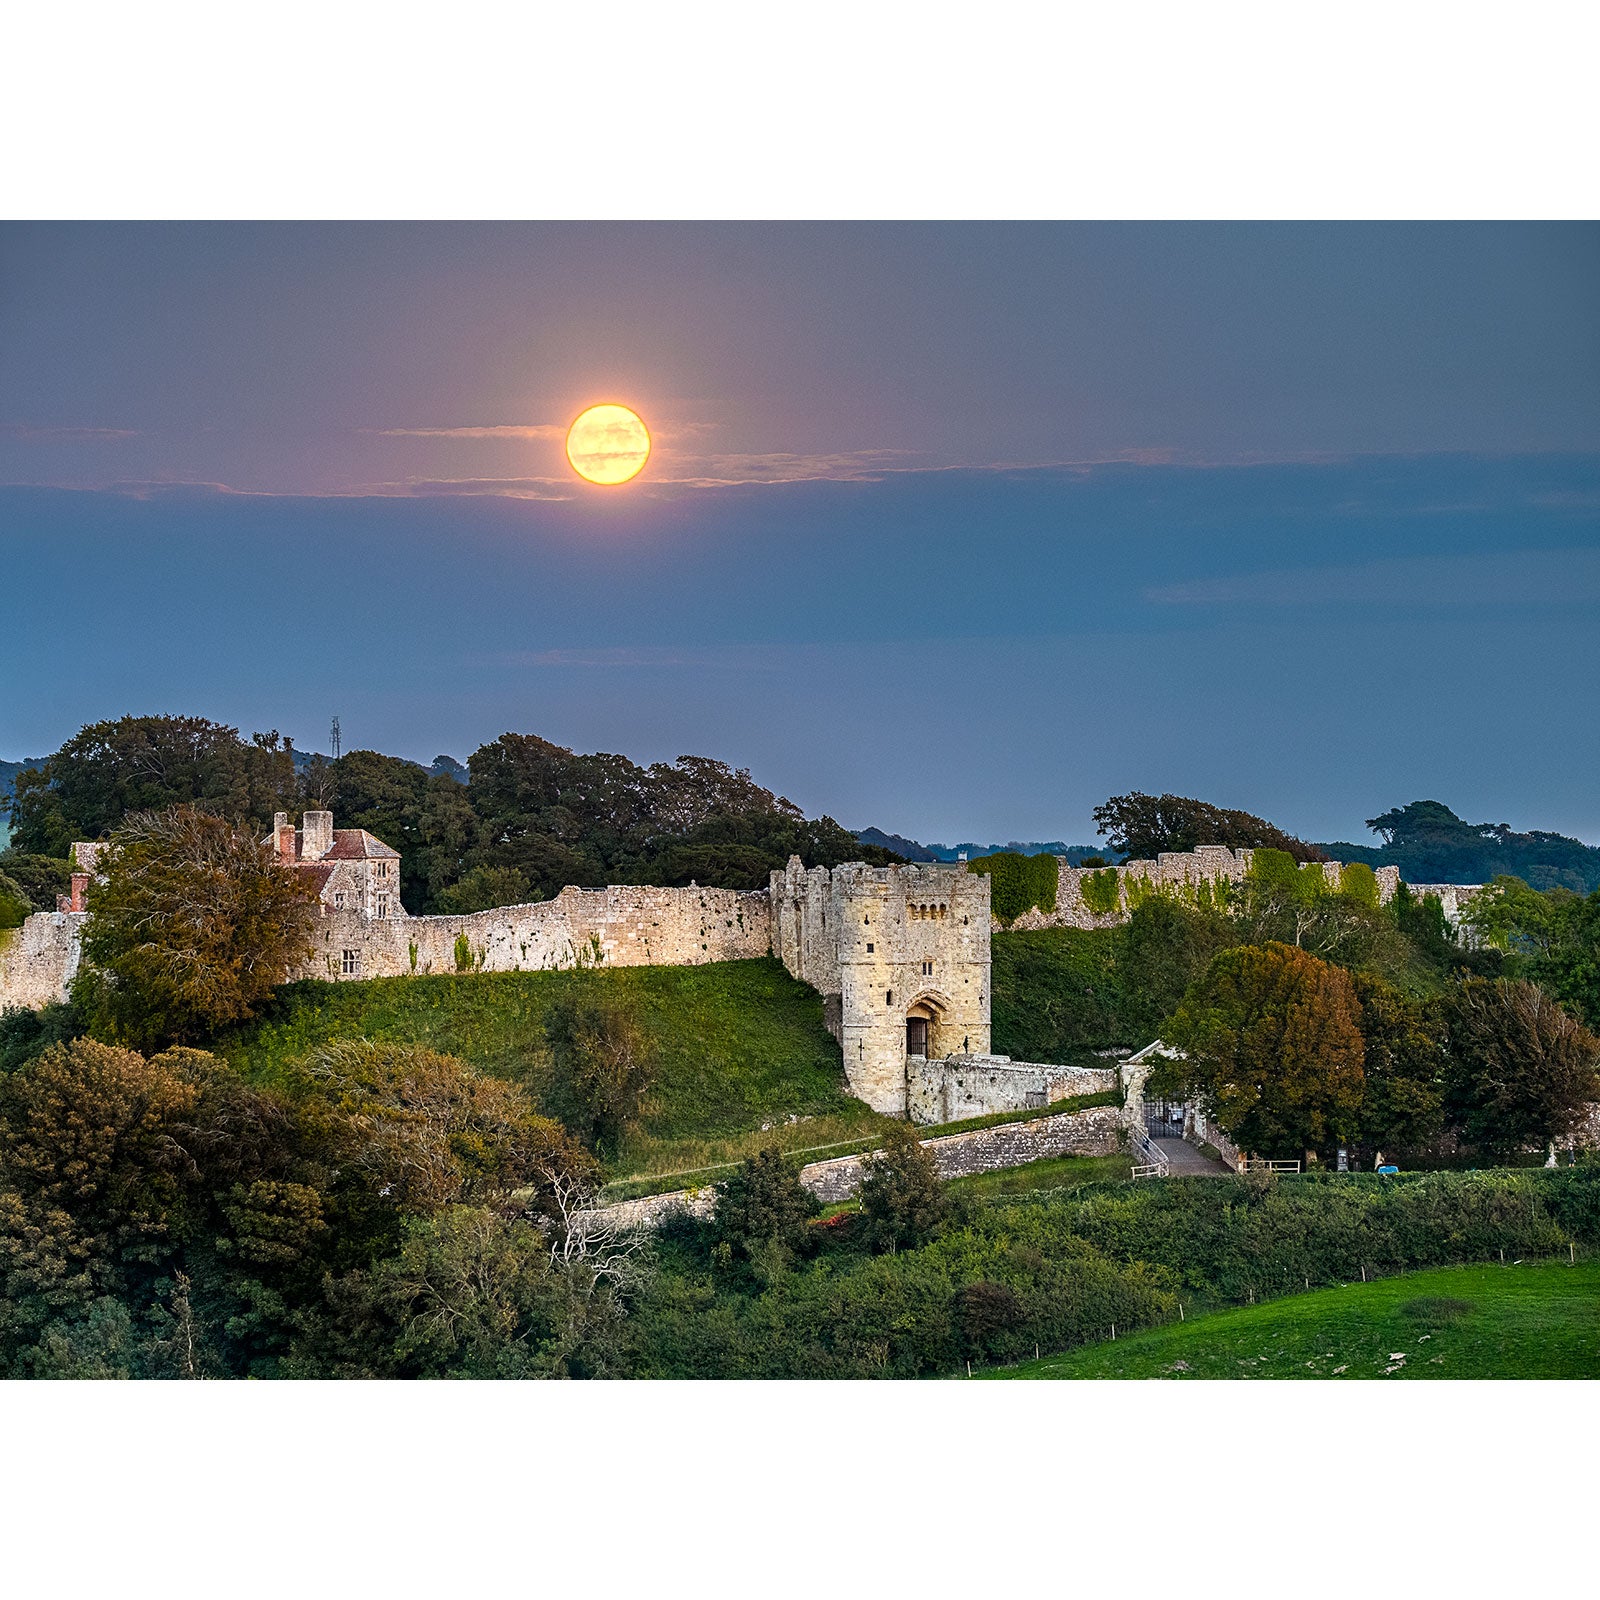 Full Moonrise rising over Carisbrooke Castle amidst a verdant landscape on the Isle of Wight, captured by Available Light Photography.